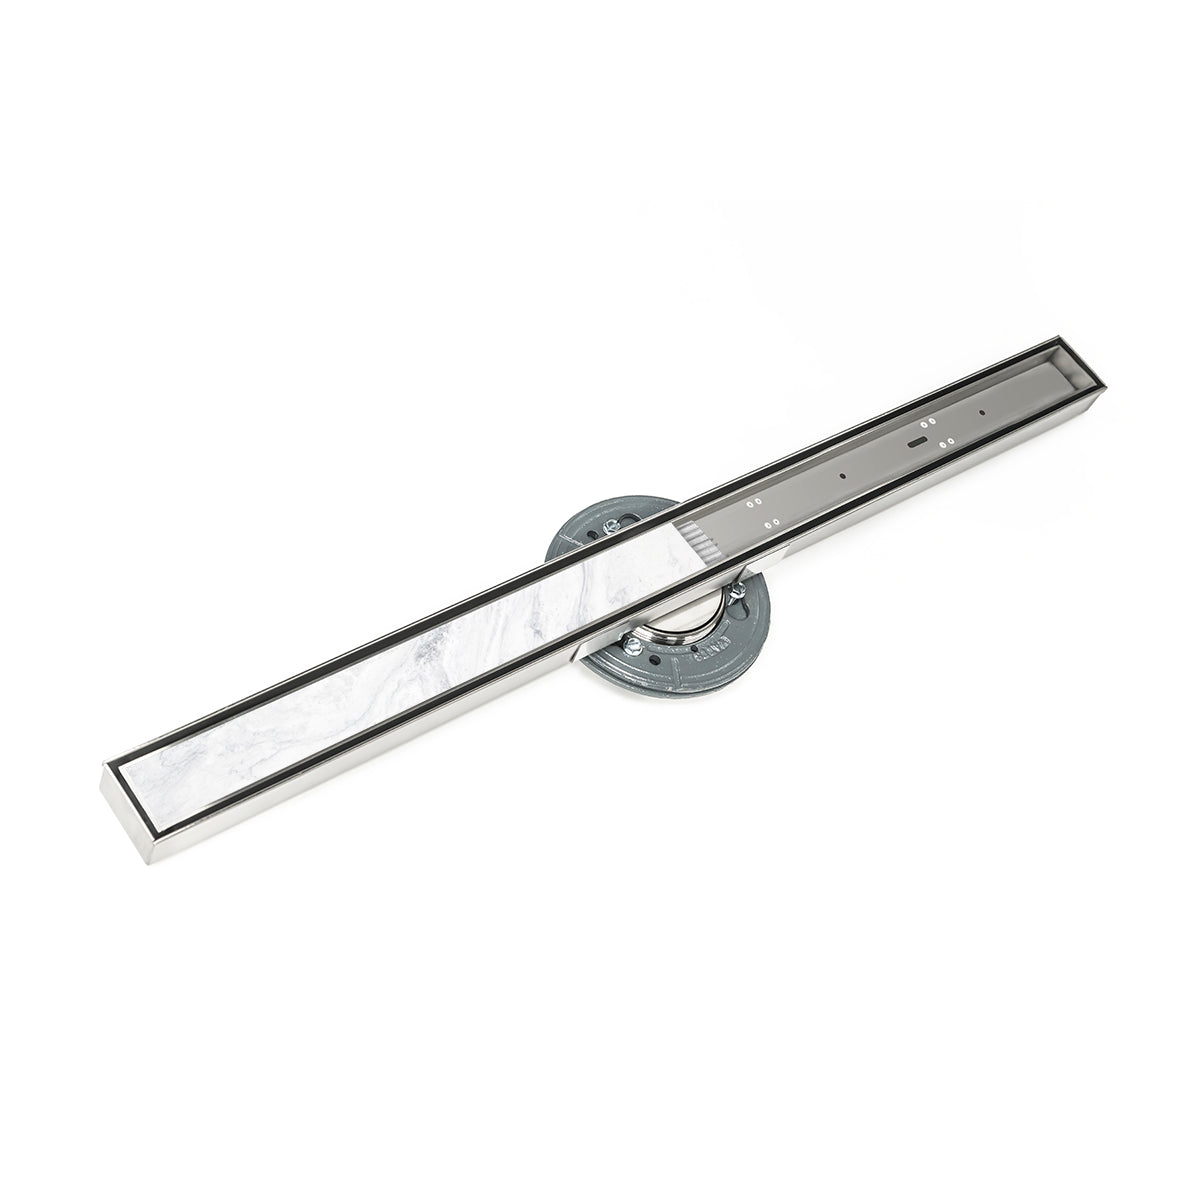 Infinity Drain 80" S-Stainless Steel Series High Flow Site Sizable Linear Drain Kit with Tile Insert Frame with ABS Drain Body, 3" Outlet